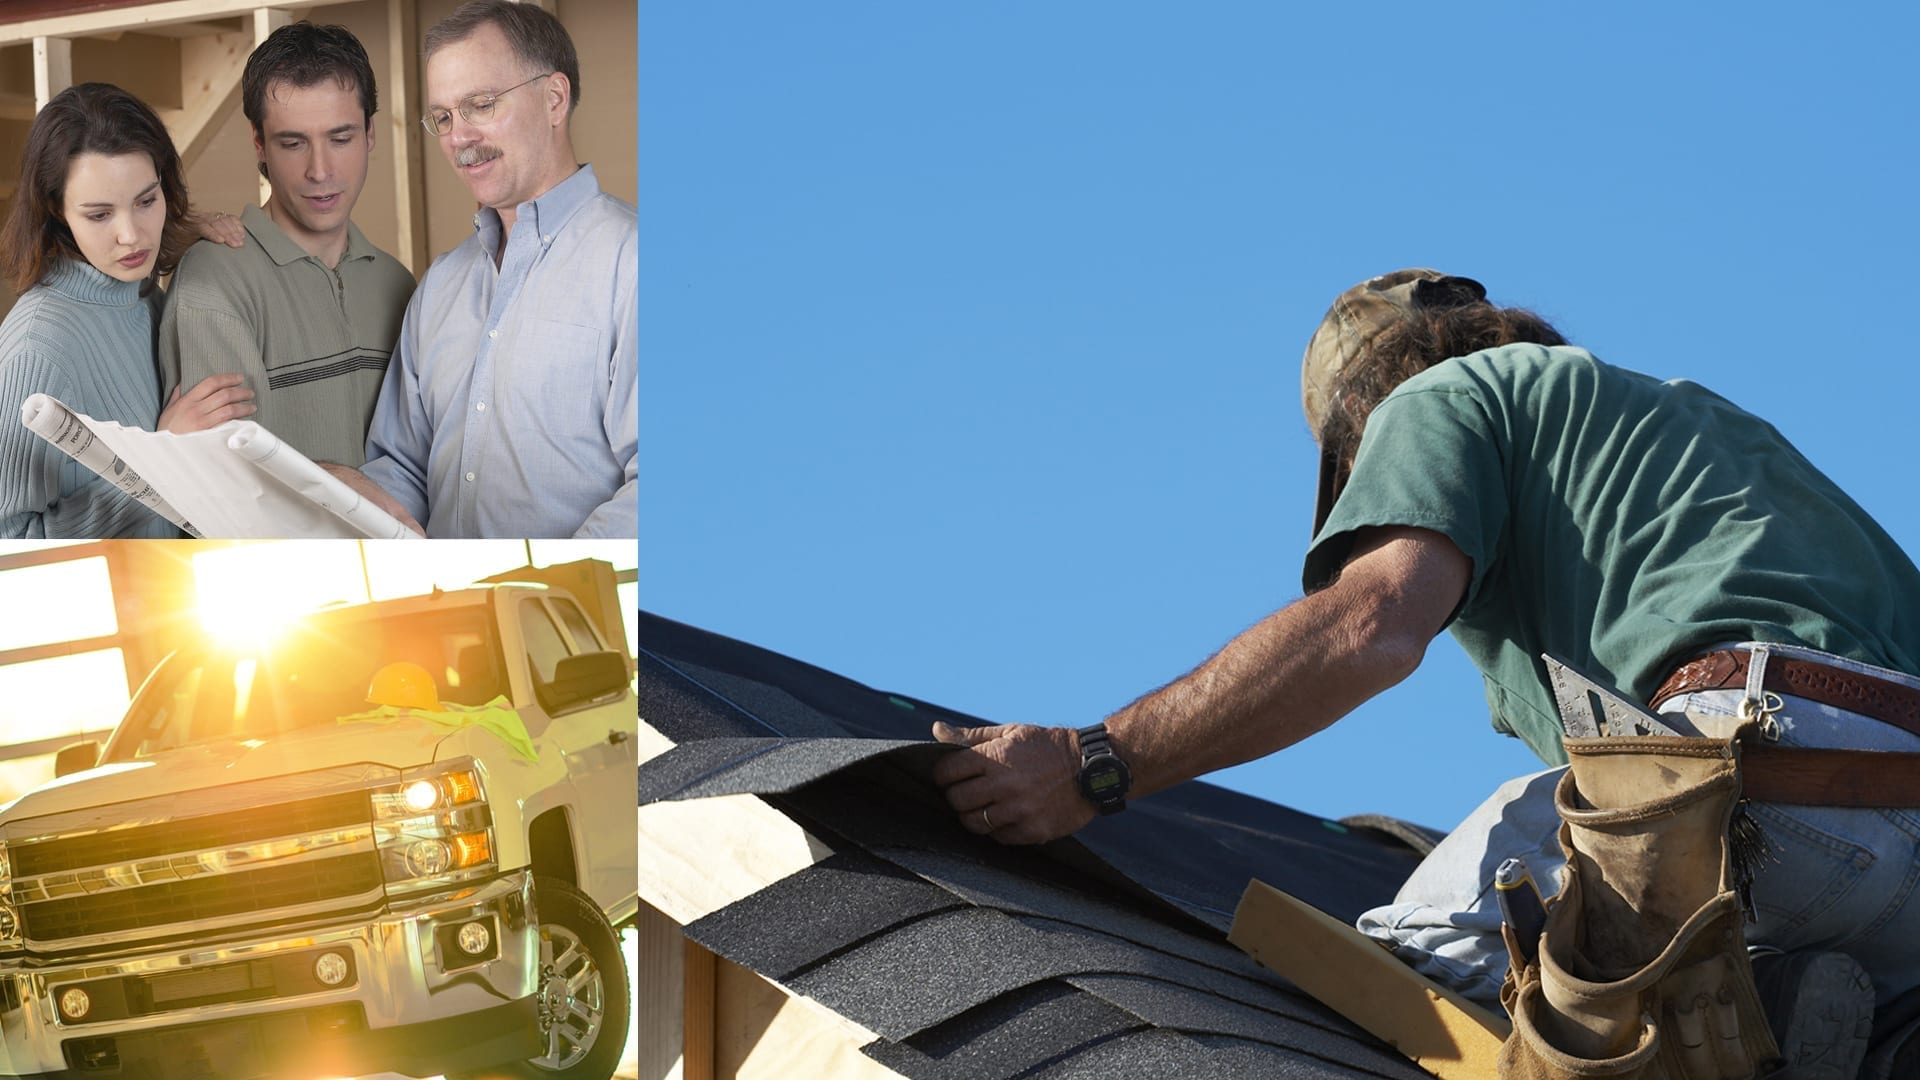 montage of roofer installing shingles, a truck, and people looking at a document